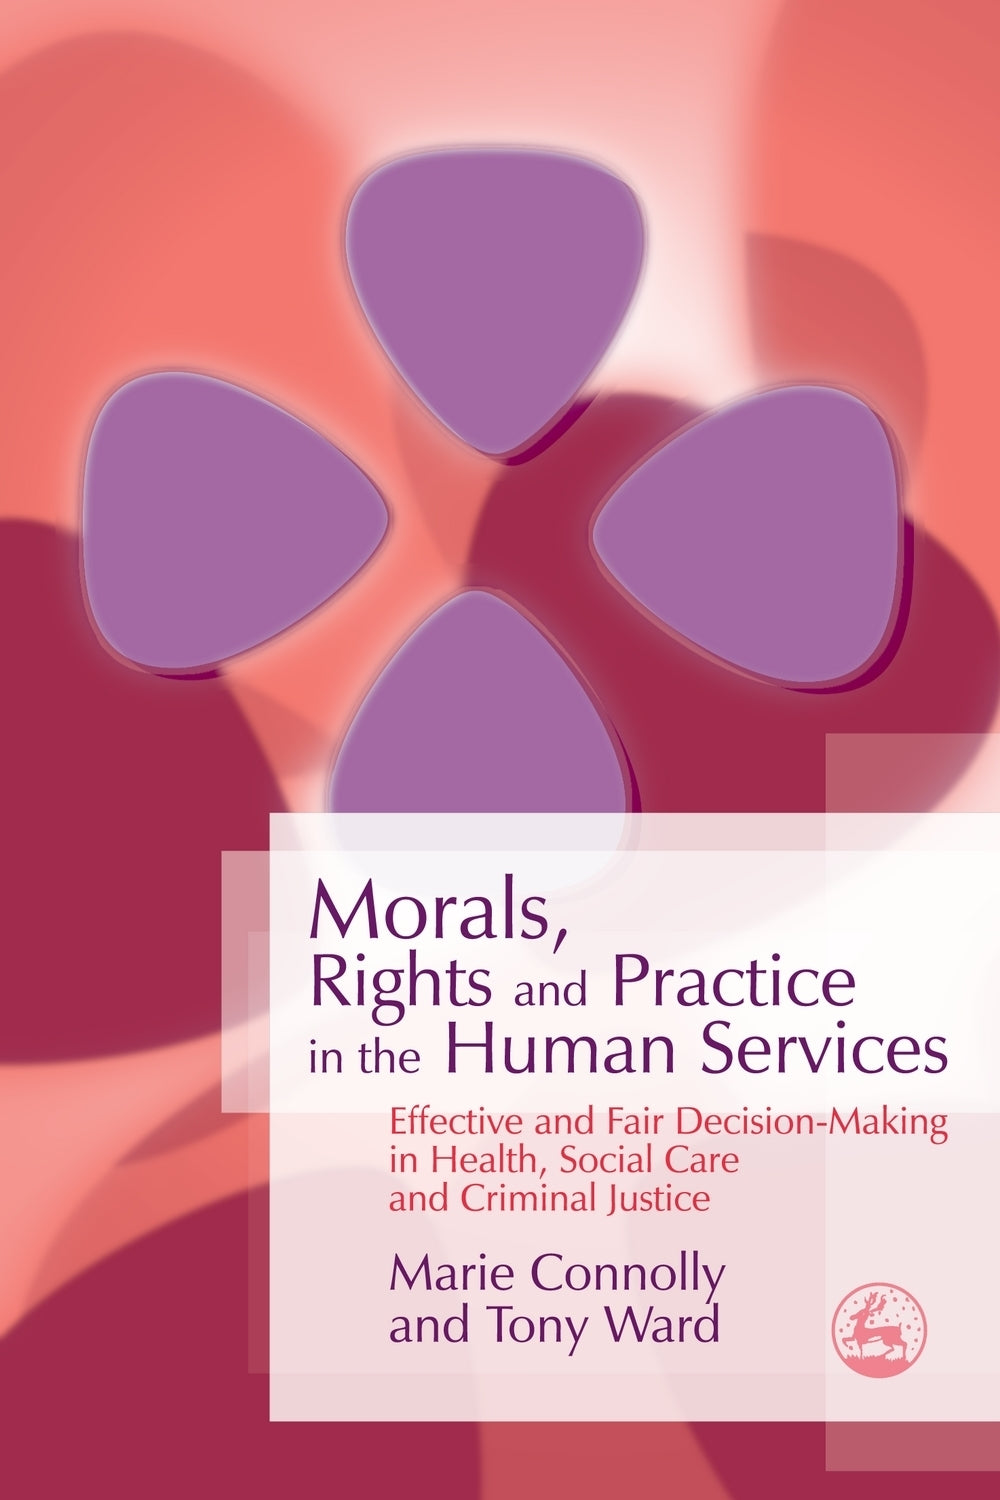 Morals, Rights and Practice in the Human Services by Tony Ward, Marie Connolly